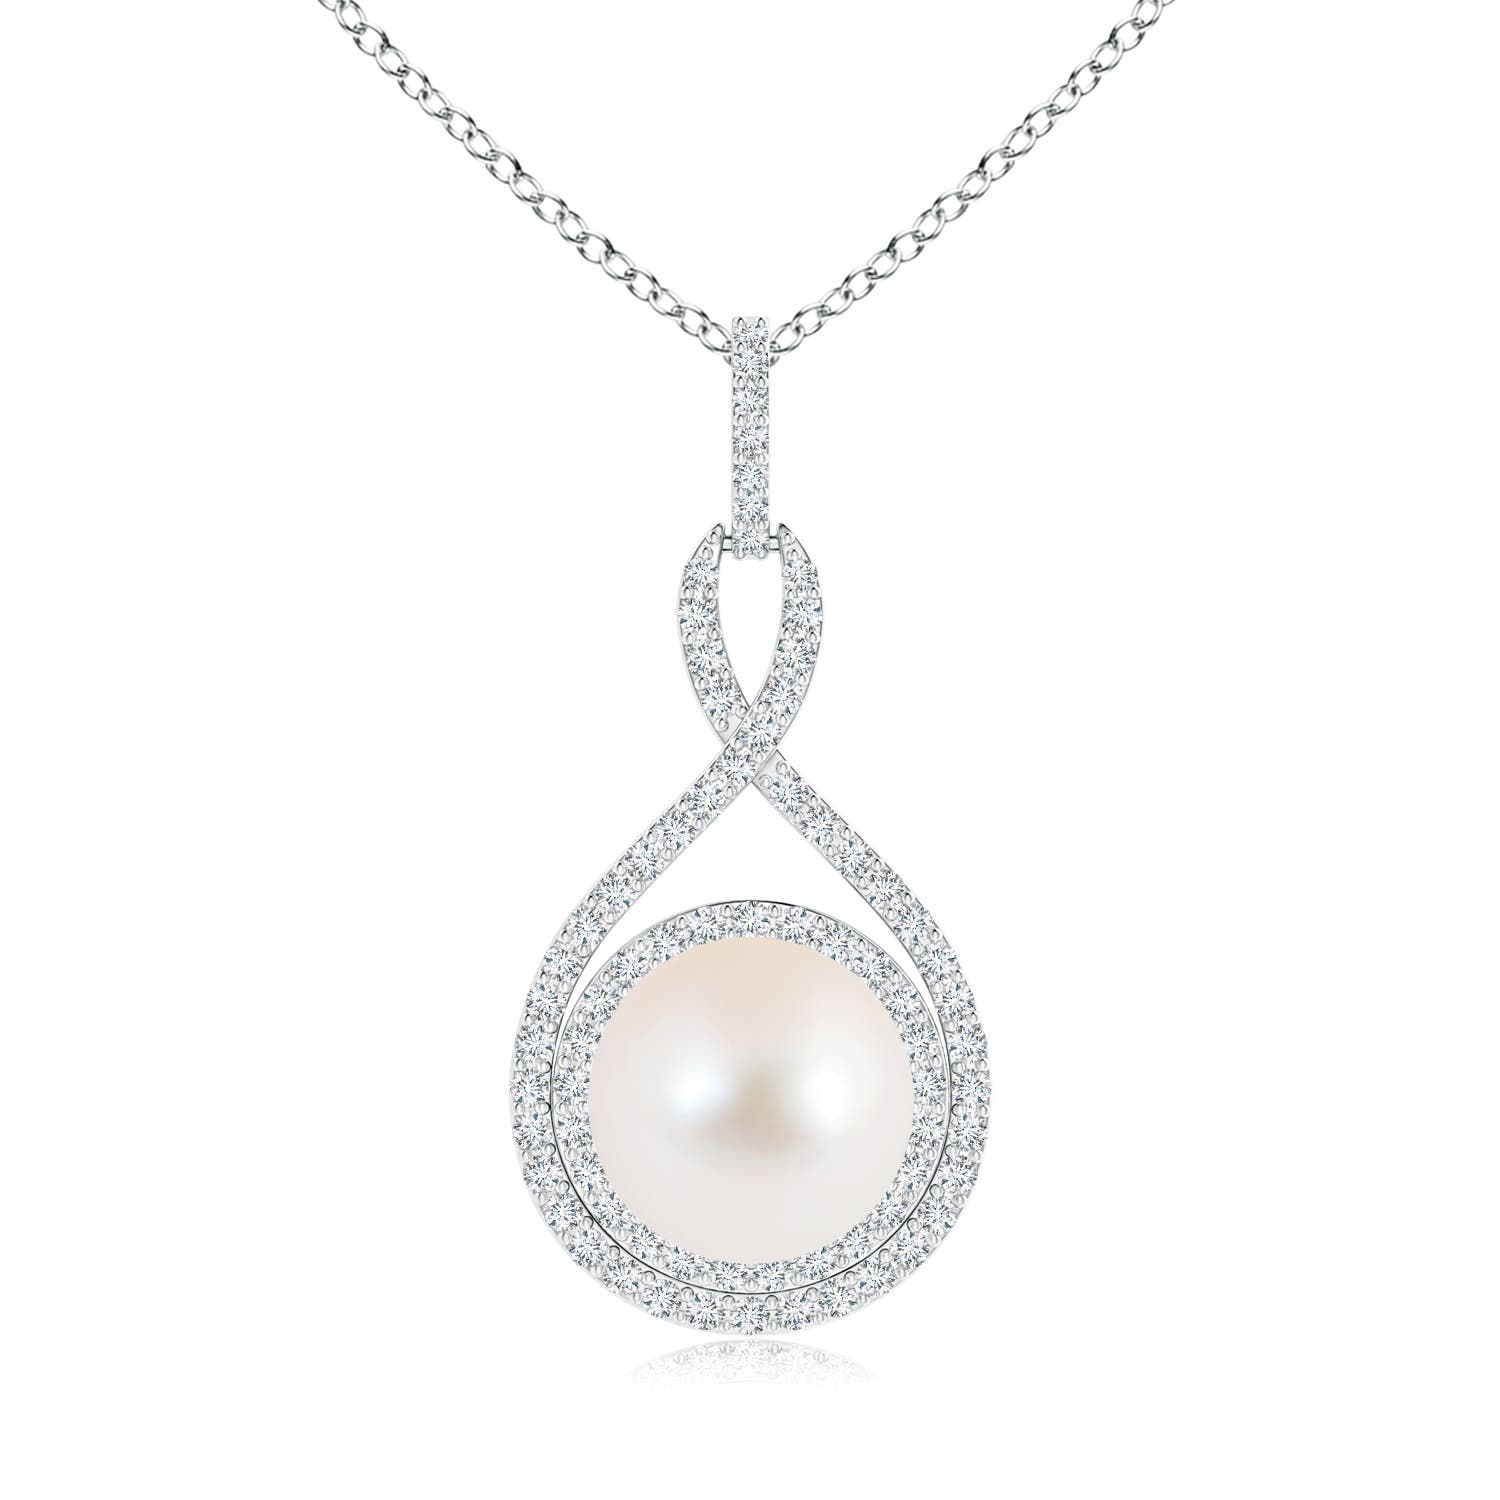 AAA - Freshwater Cultured Pearl / 7.79 CT / 14 KT White Gold